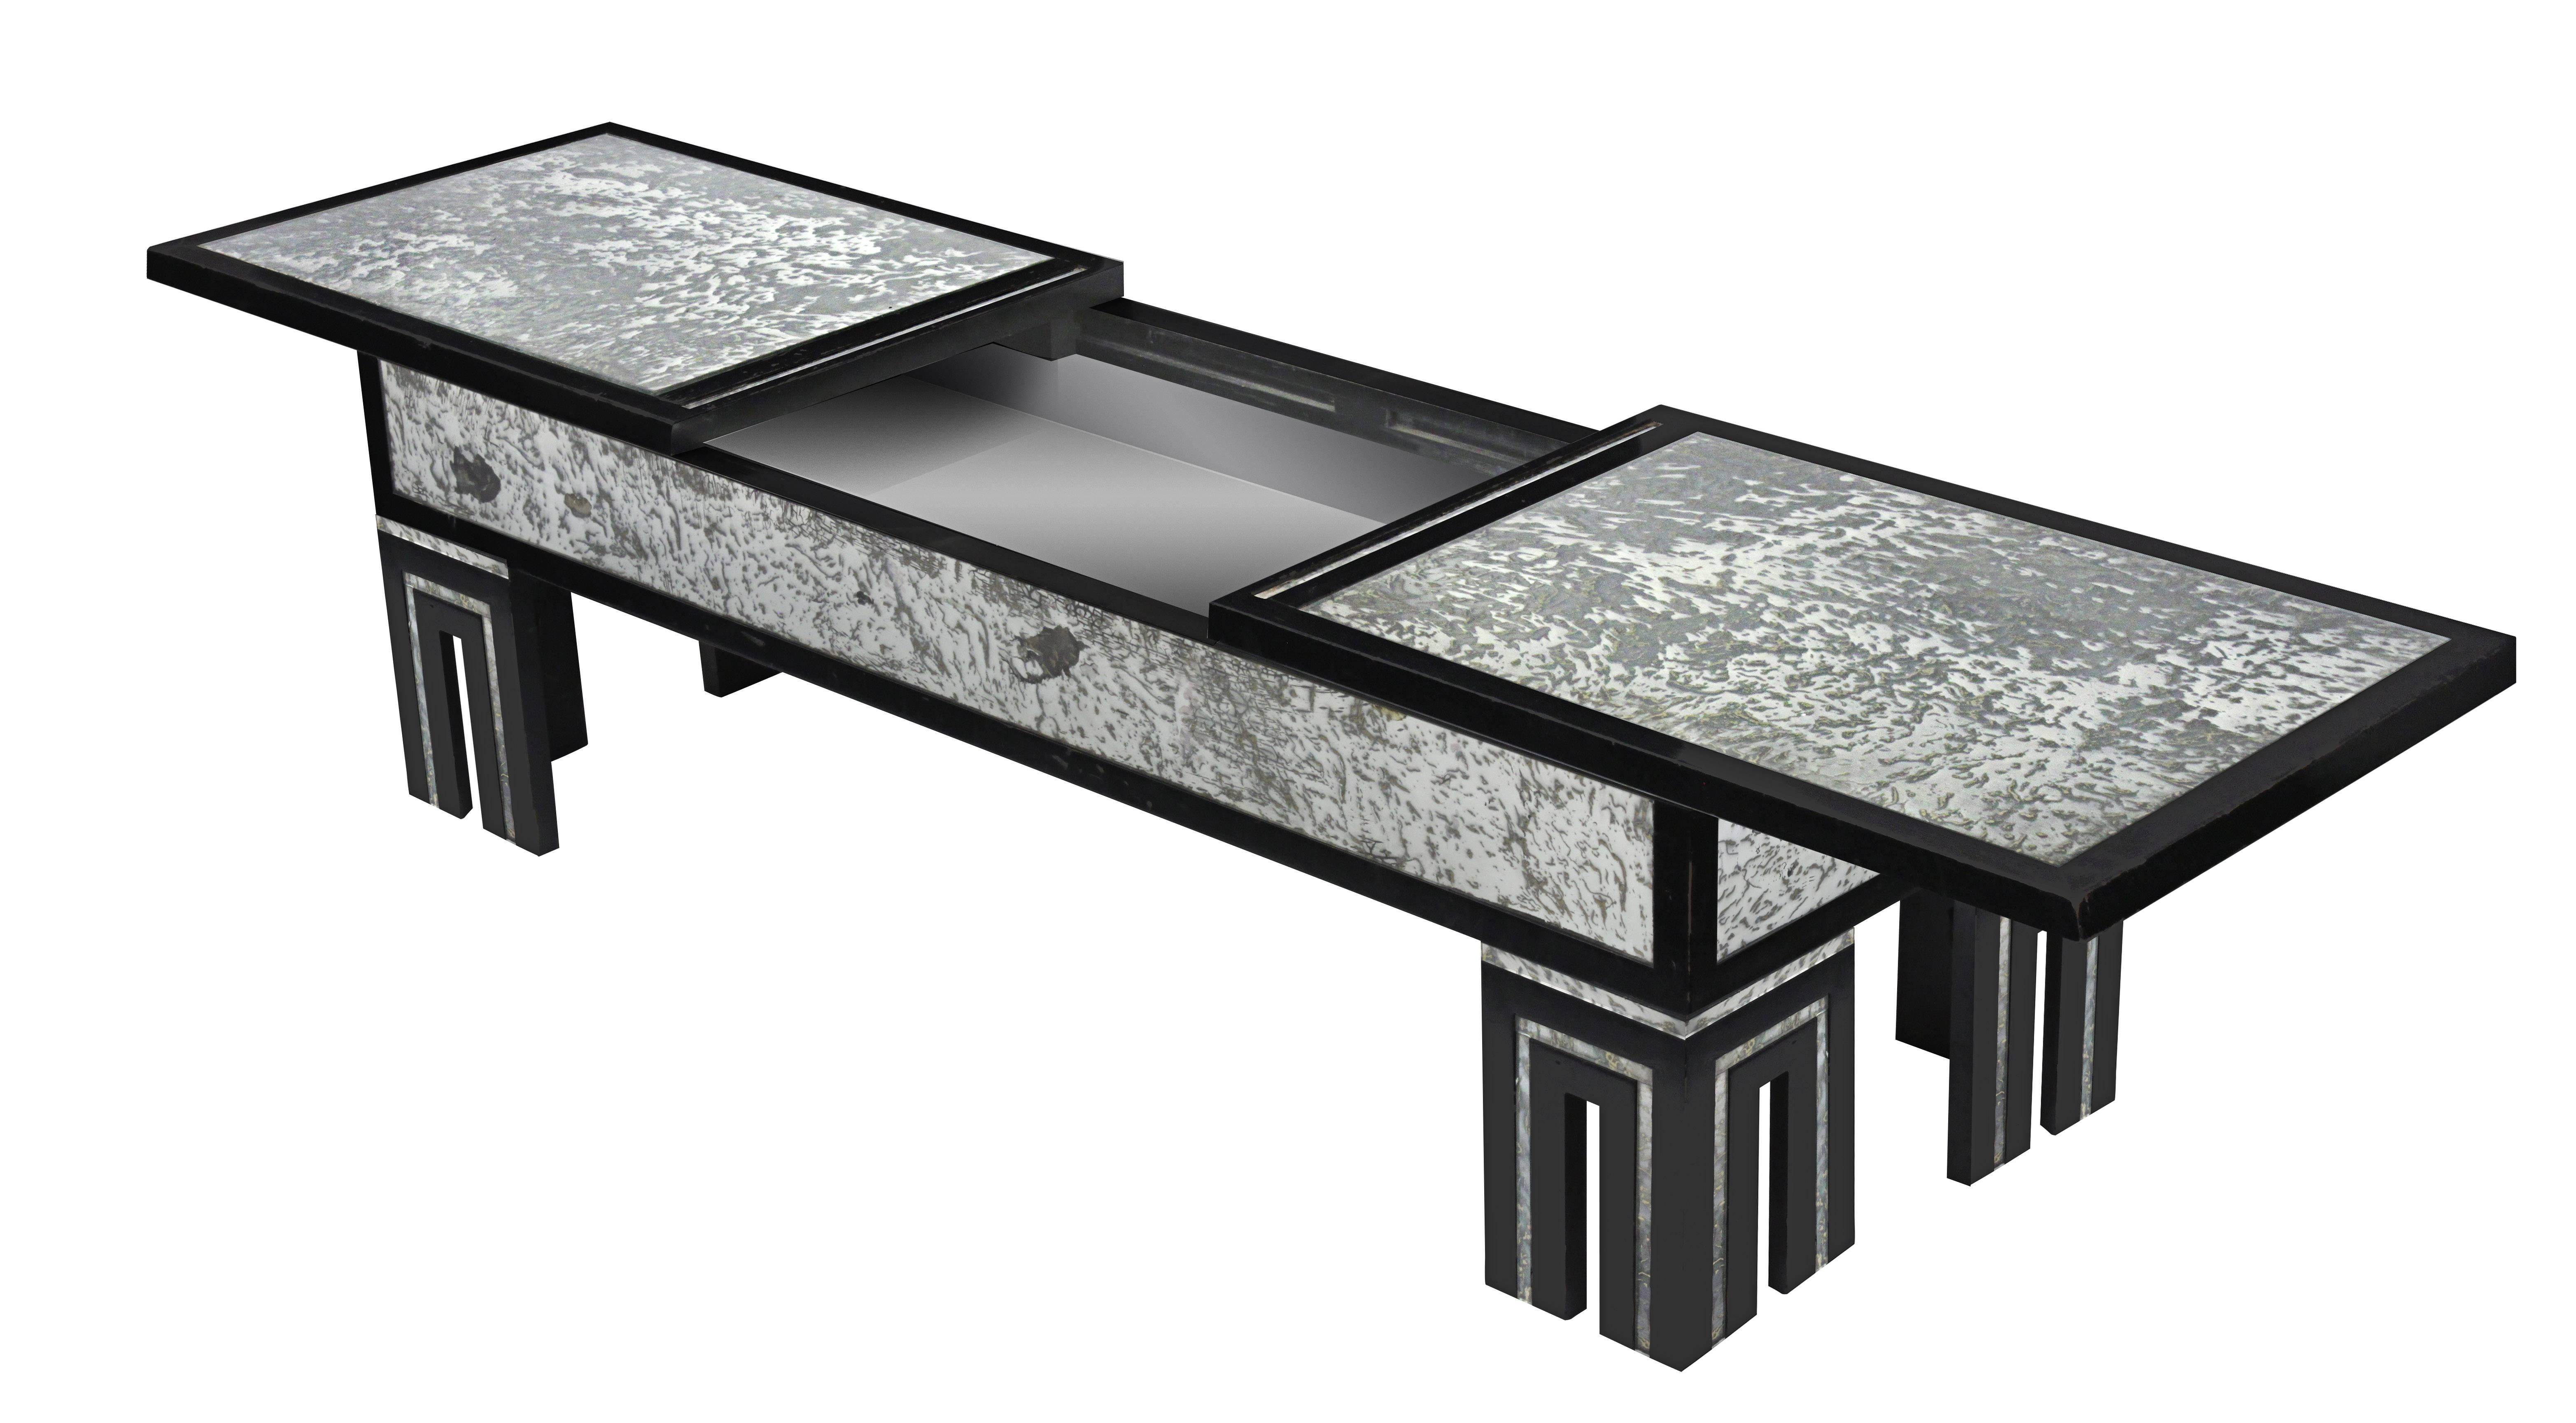 Ebonized coffee table with mottled antique glass and retractable top by James Mont, American, 1940s. Table is 68 inches wide when top is fully opened.
   